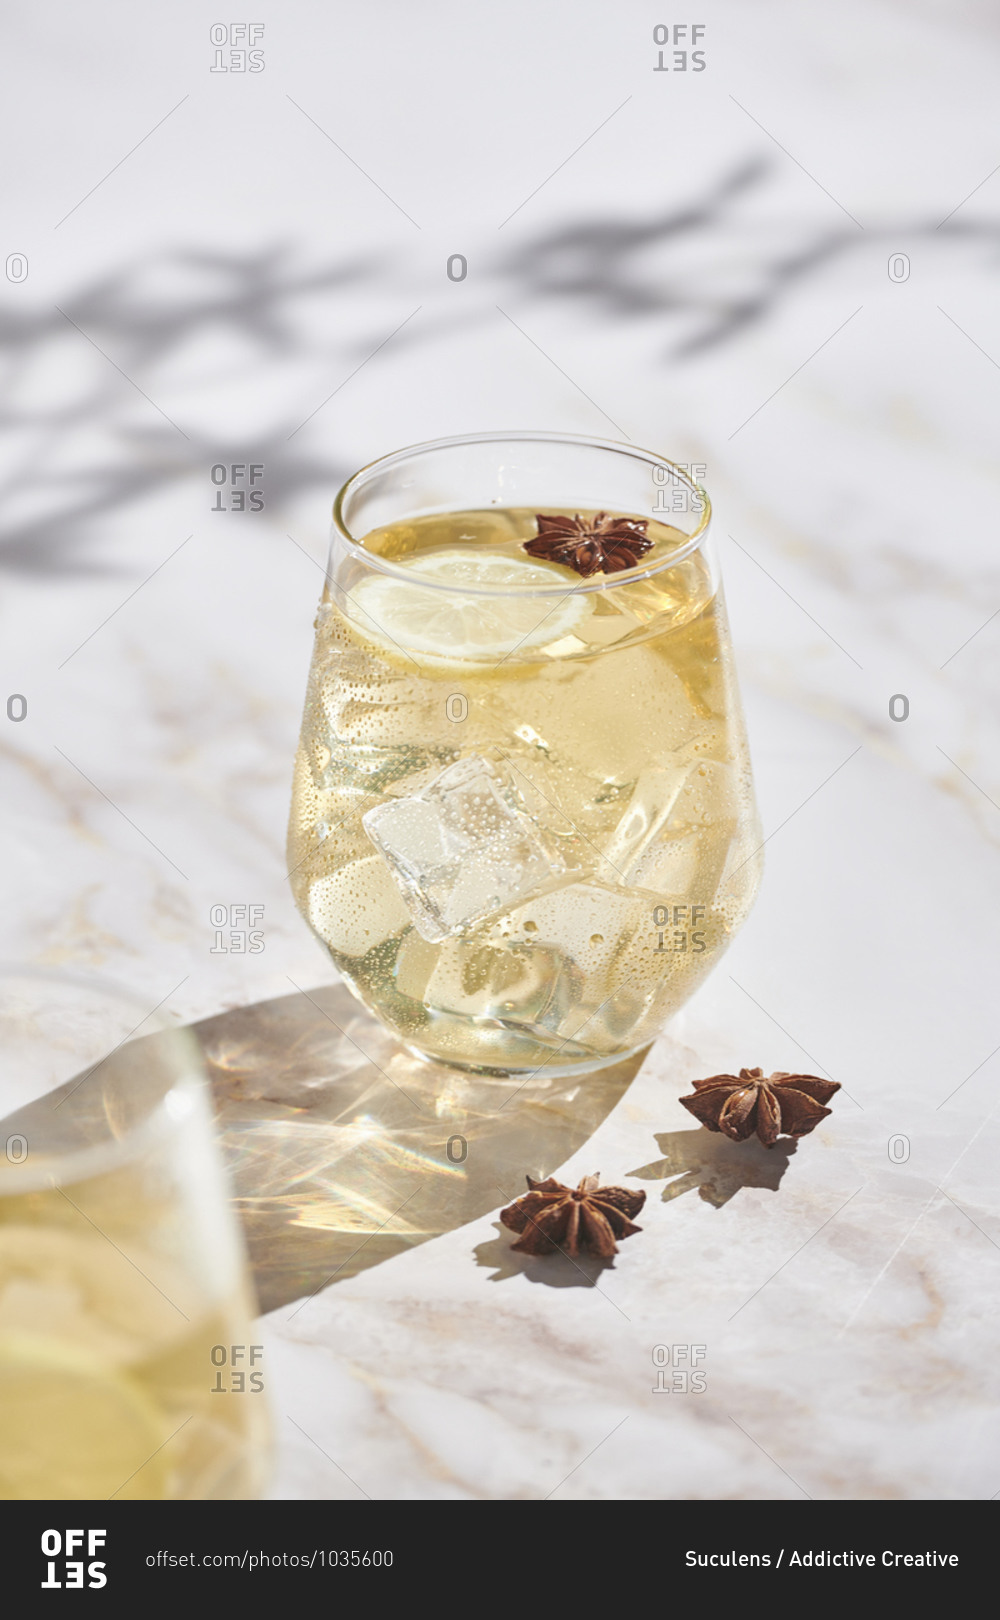 High angle of delicious cocktails with lemon slices and ice cubes garnished with star anise and served on marble table